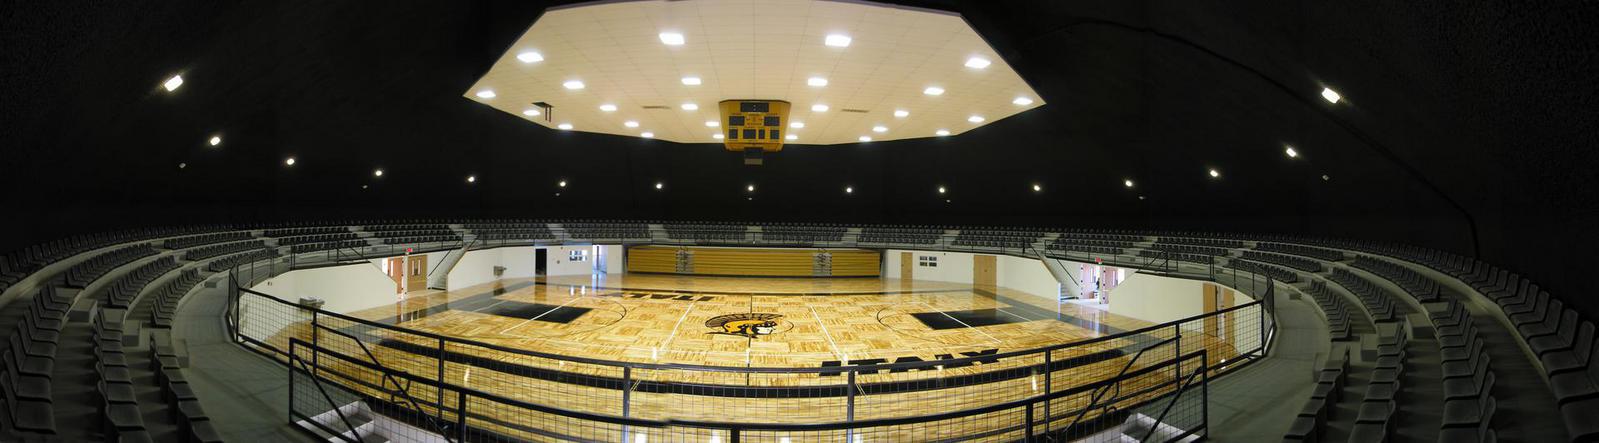 The Italy High School Multipurpose Center is used as the town's tornado shelter as well as providing space for sports and community events.